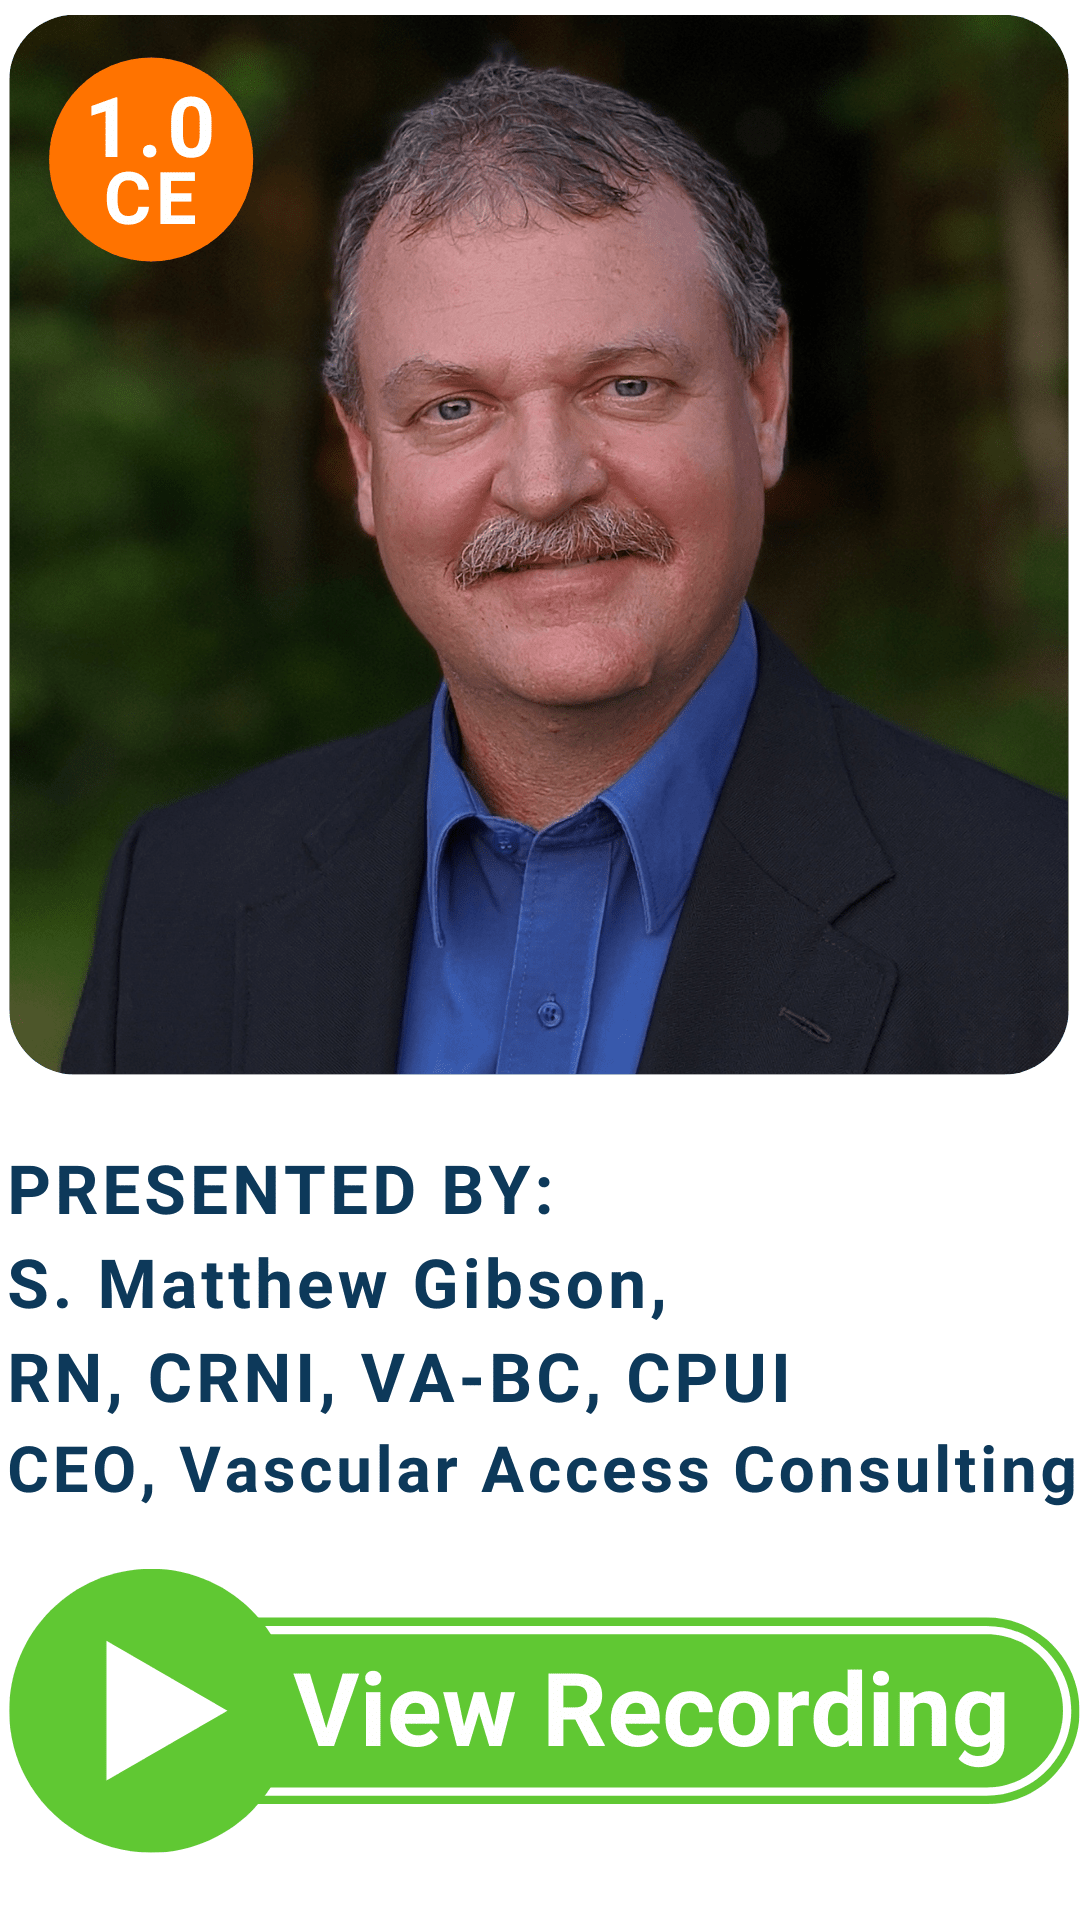 Headshot of S. Matthew Gibson, RN, CRNI, VA-BC, CPUI with circle icon text: 1.0 CE